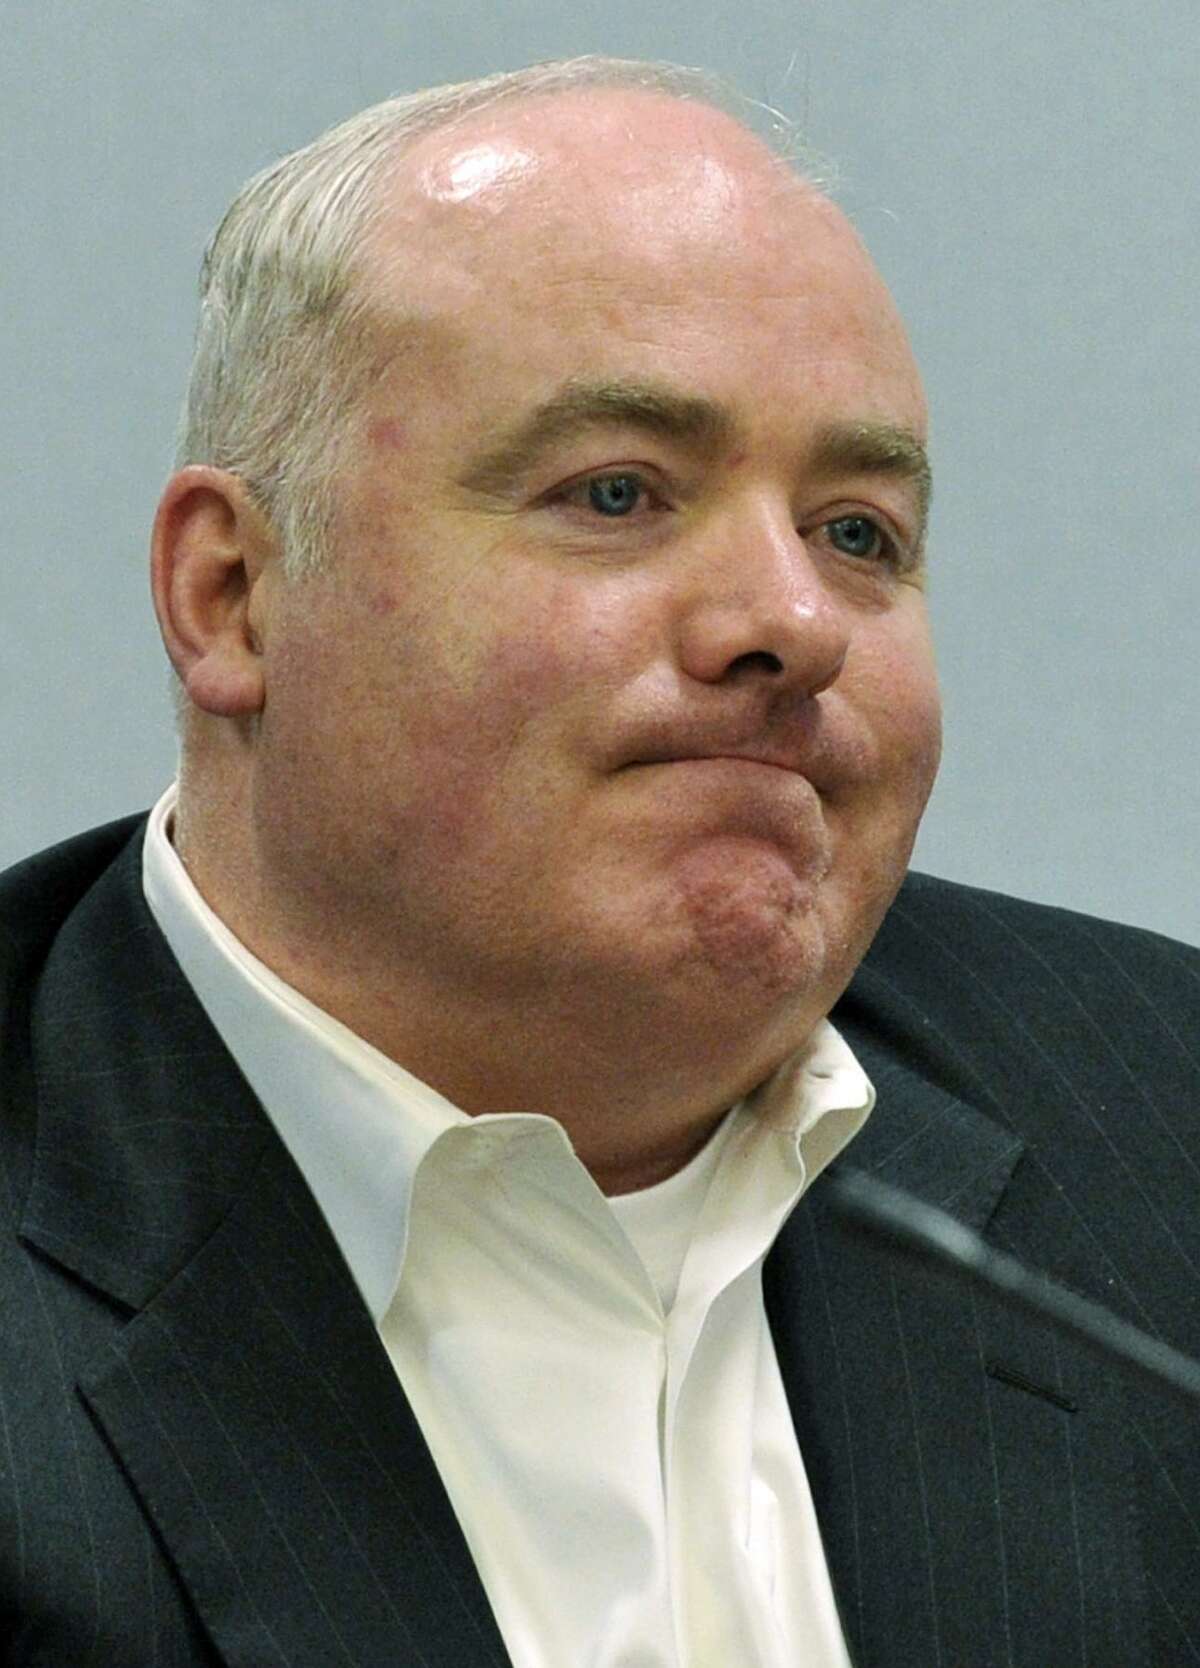 Michael Skakel listens to his former defense attorney Mickey Sherman testify at Skakel's habeas corpus hearing at Rockville Superior Court in Vernon, Conn. in 2013. The Connecticut Supreme Court has vacated Skakel's murder conviction and ordered a new trial in connection with a 1975 killing of Martha Moxley in Greenwich. The court issued a 4-3 ruling Friday that Skakel's trial attorney, Michael Sherman, failed to present evidence of an alibi.